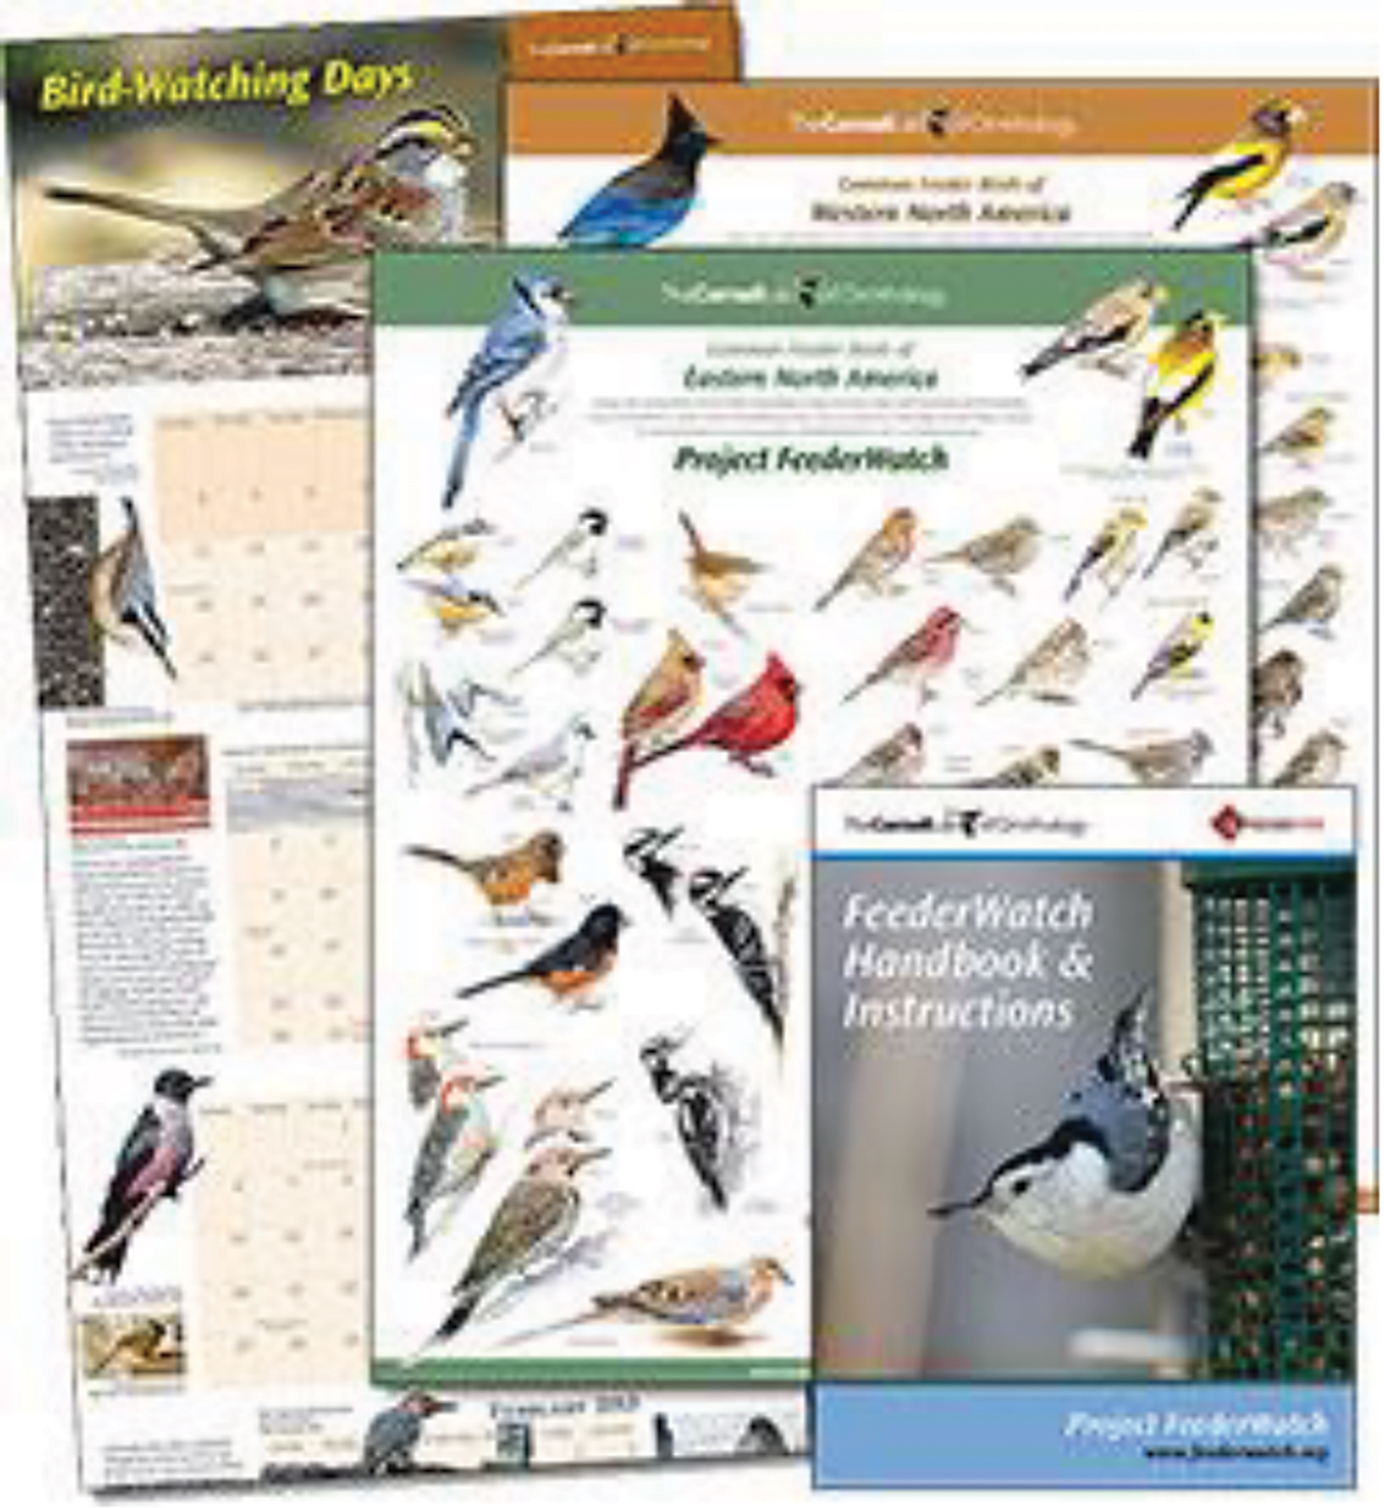 Project FeederWatch Research Kit.